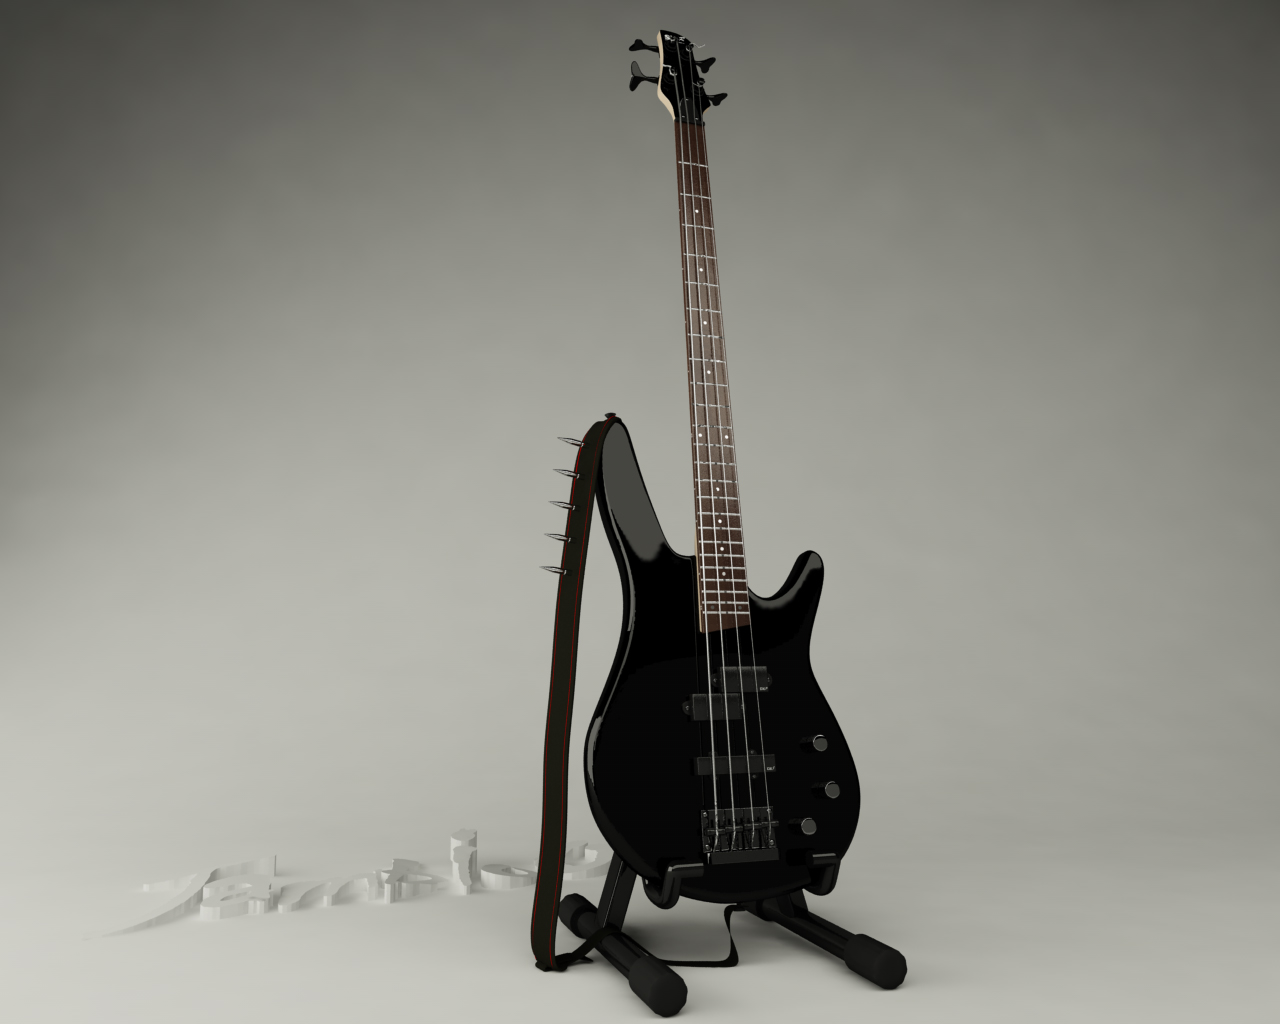 Ibanez SDGR Bass Guitar by JambioO on